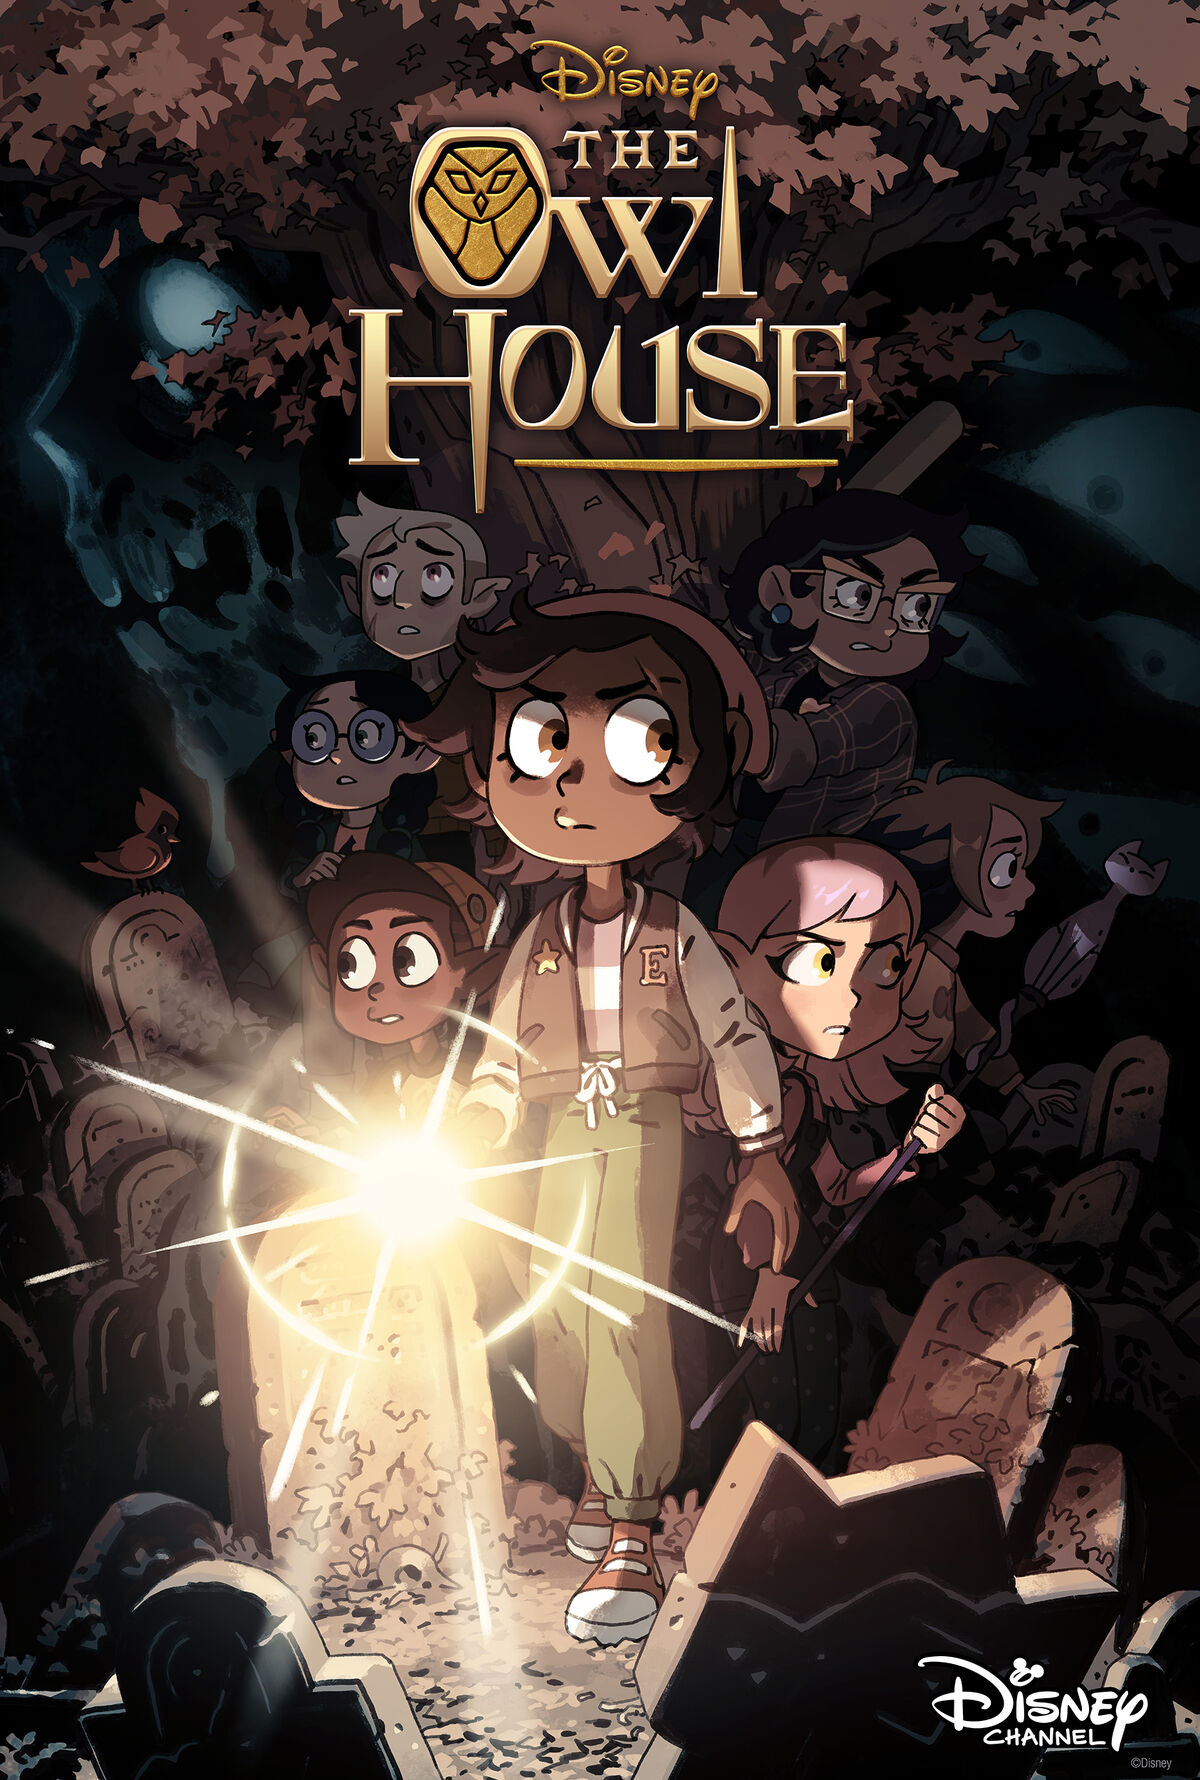 The Owl House: Season 3, Episode 3 (Watching and Dreaming) (Premiere T